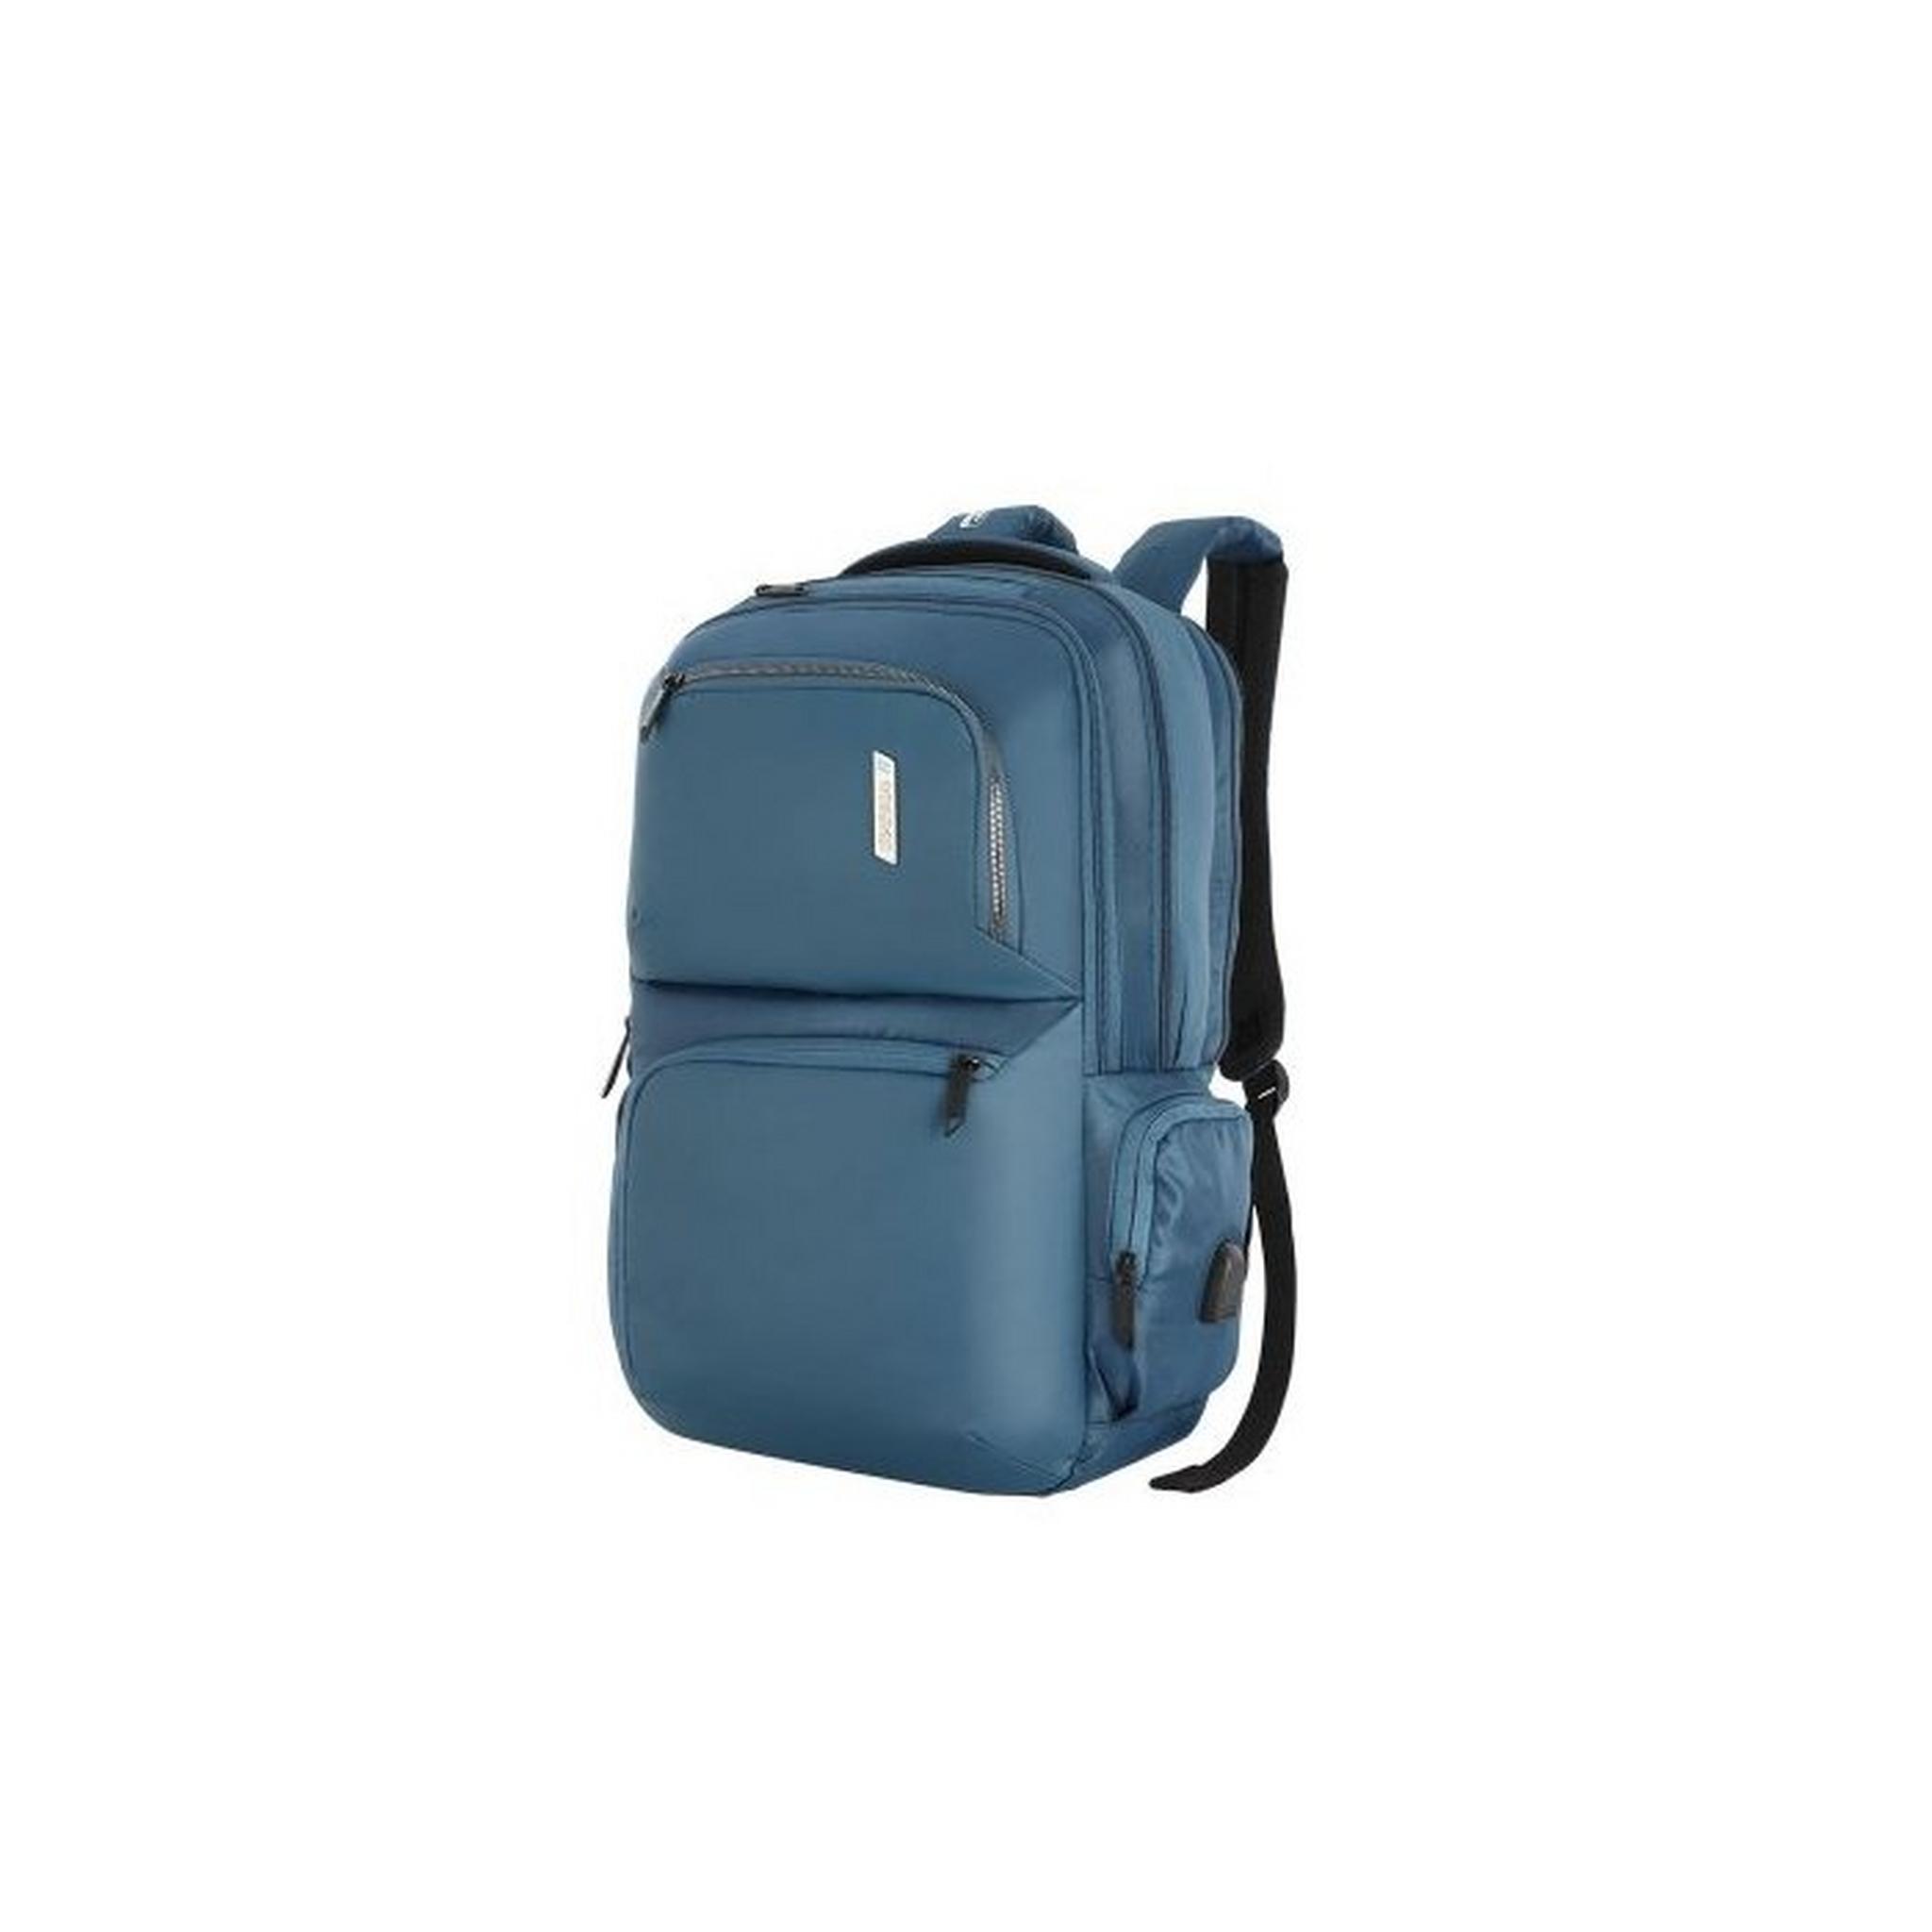 American Tourister SEGNO 2.0 Laptop Backpack - Blue| Xcite